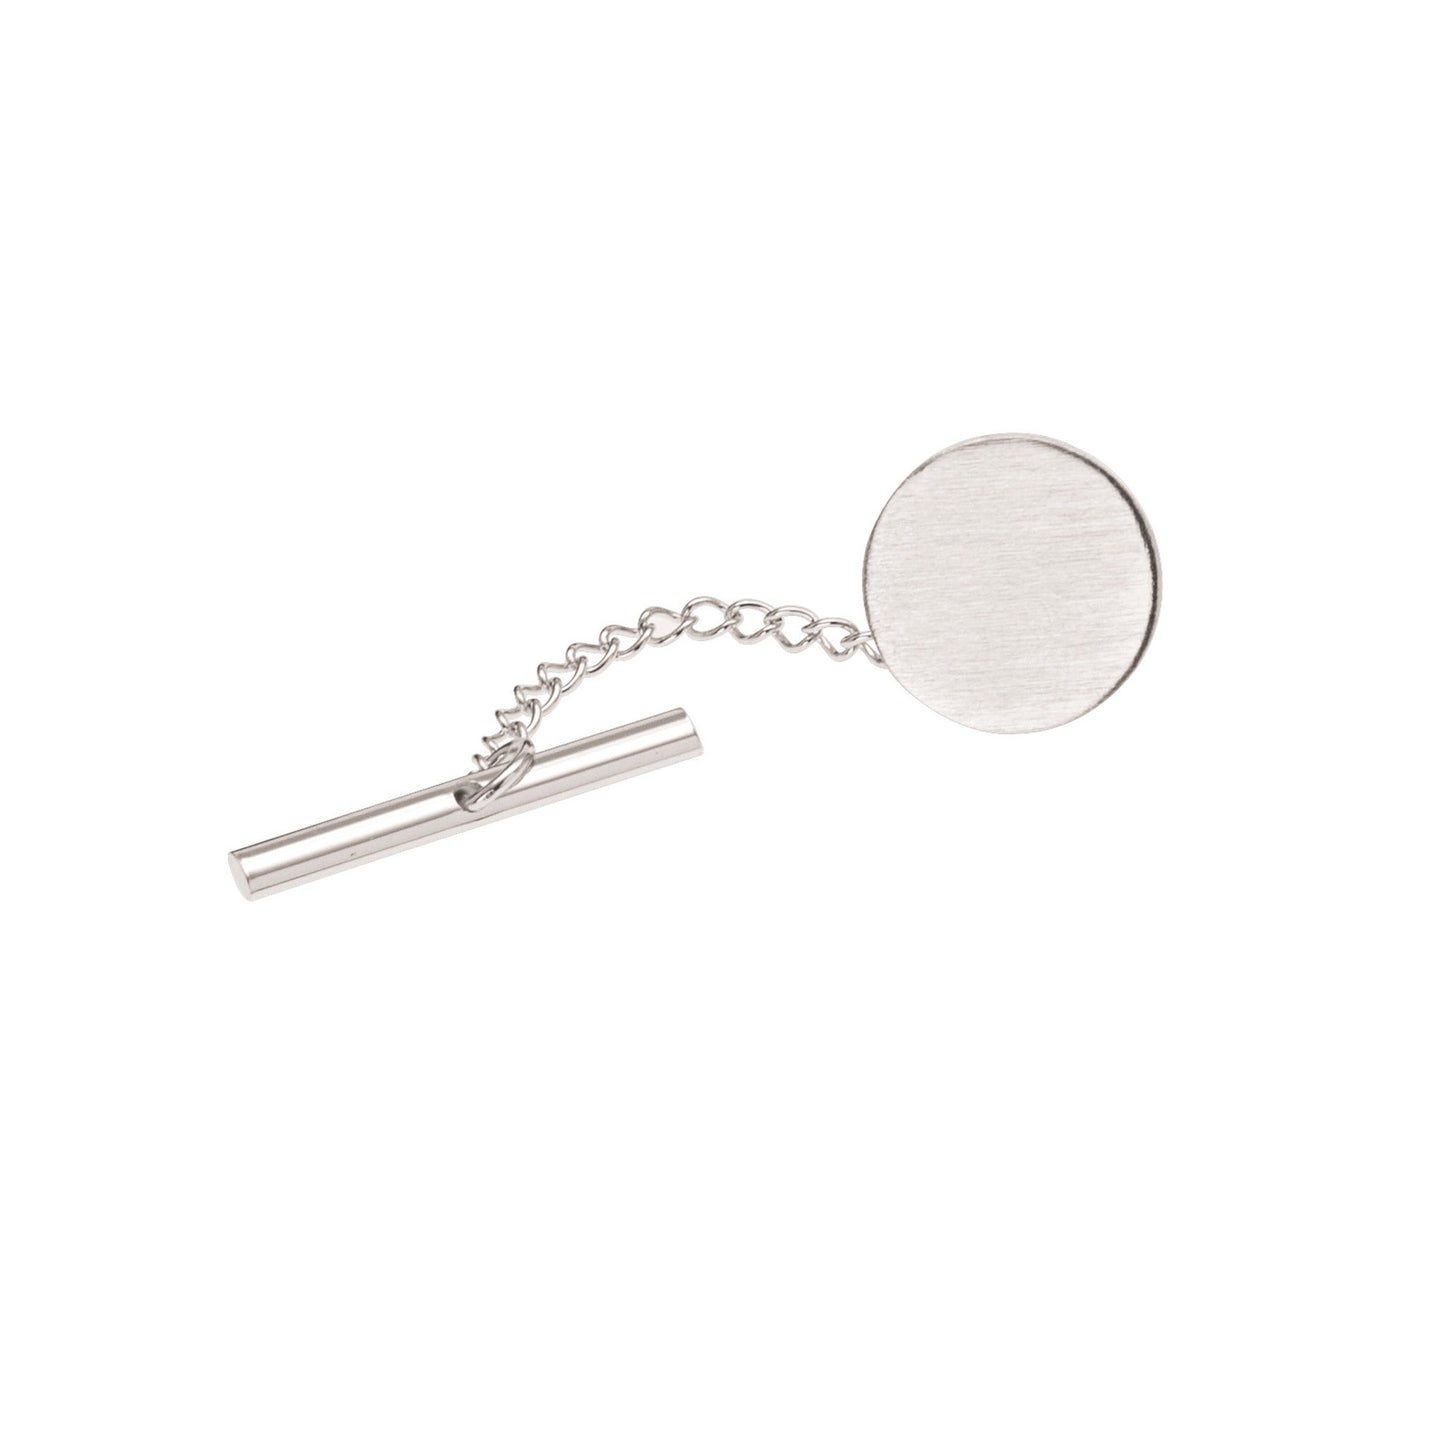 A round polished tie tack displayed on a neutral white background.